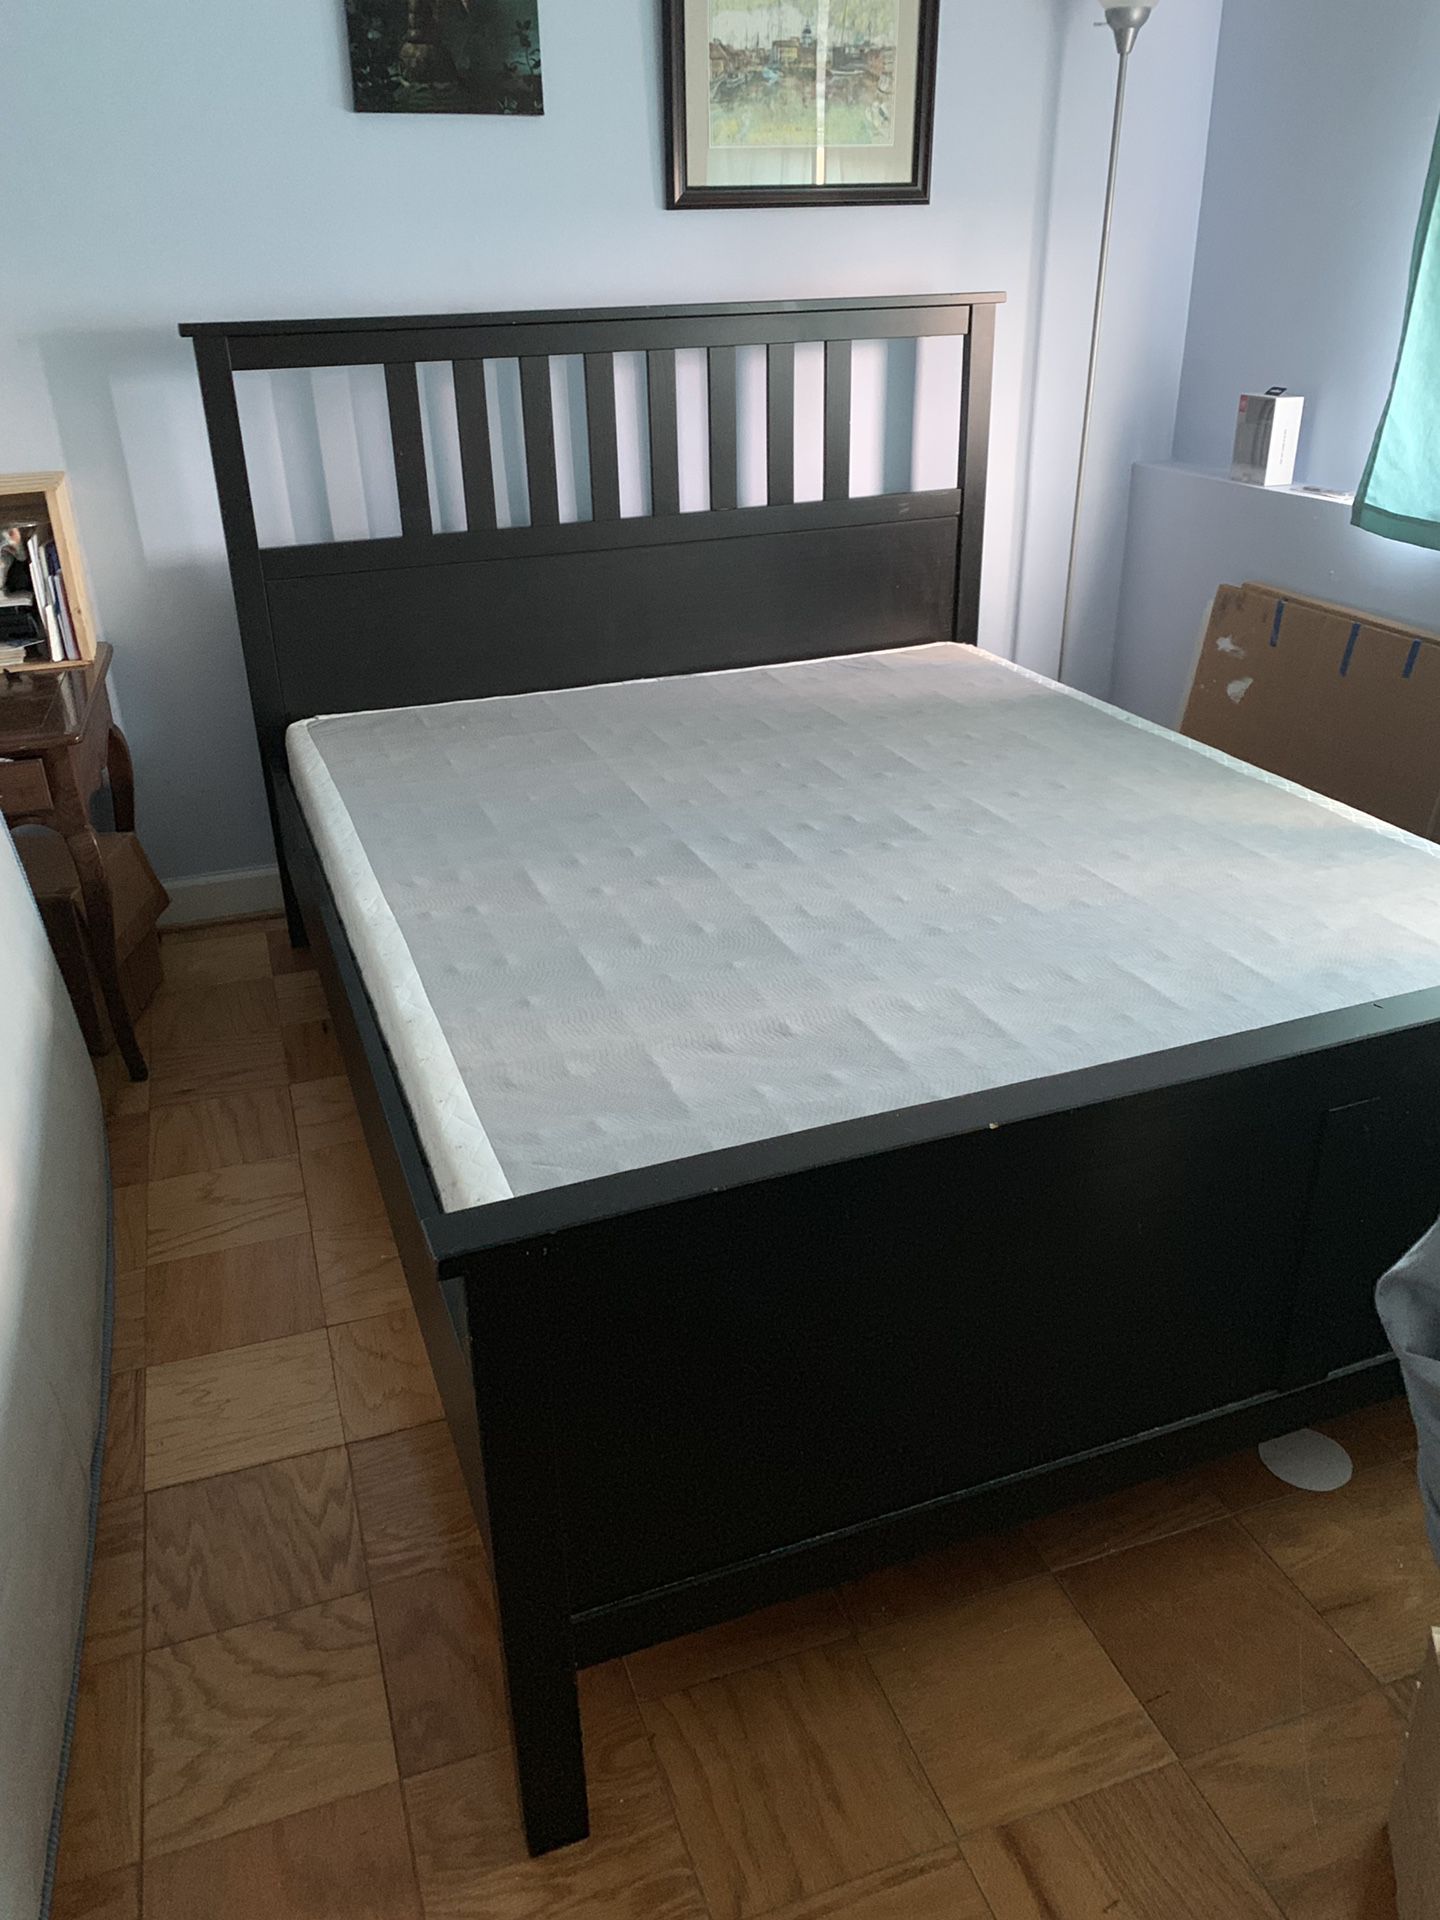 Queen size bed frame with spring box